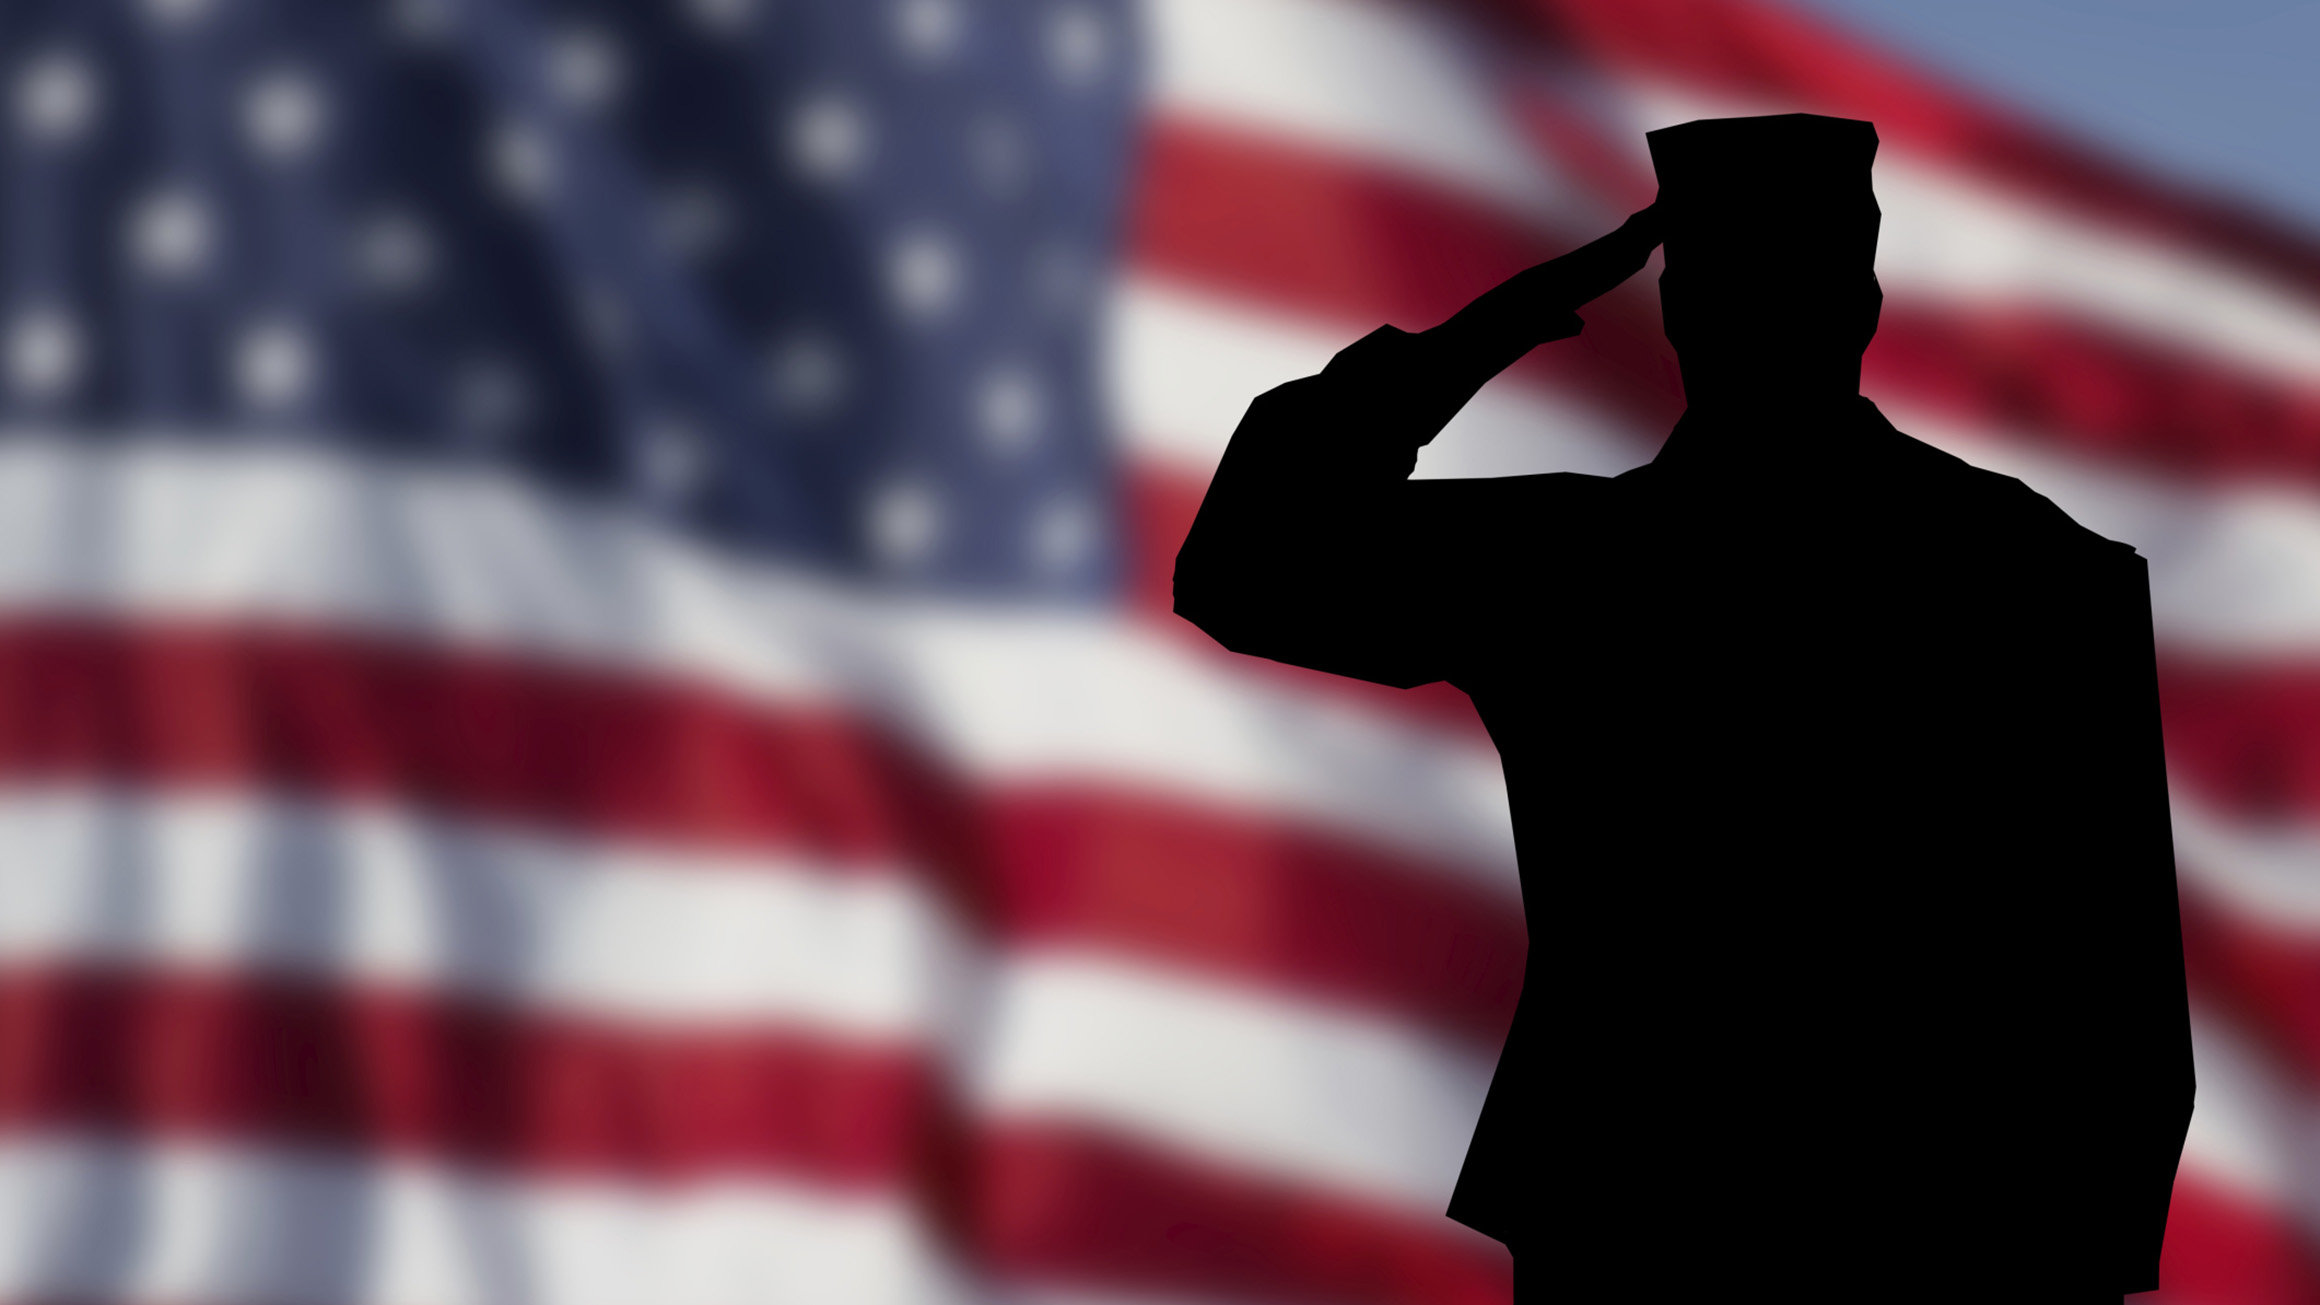 The silhouette of a service member saluting with the american flag waving in the background